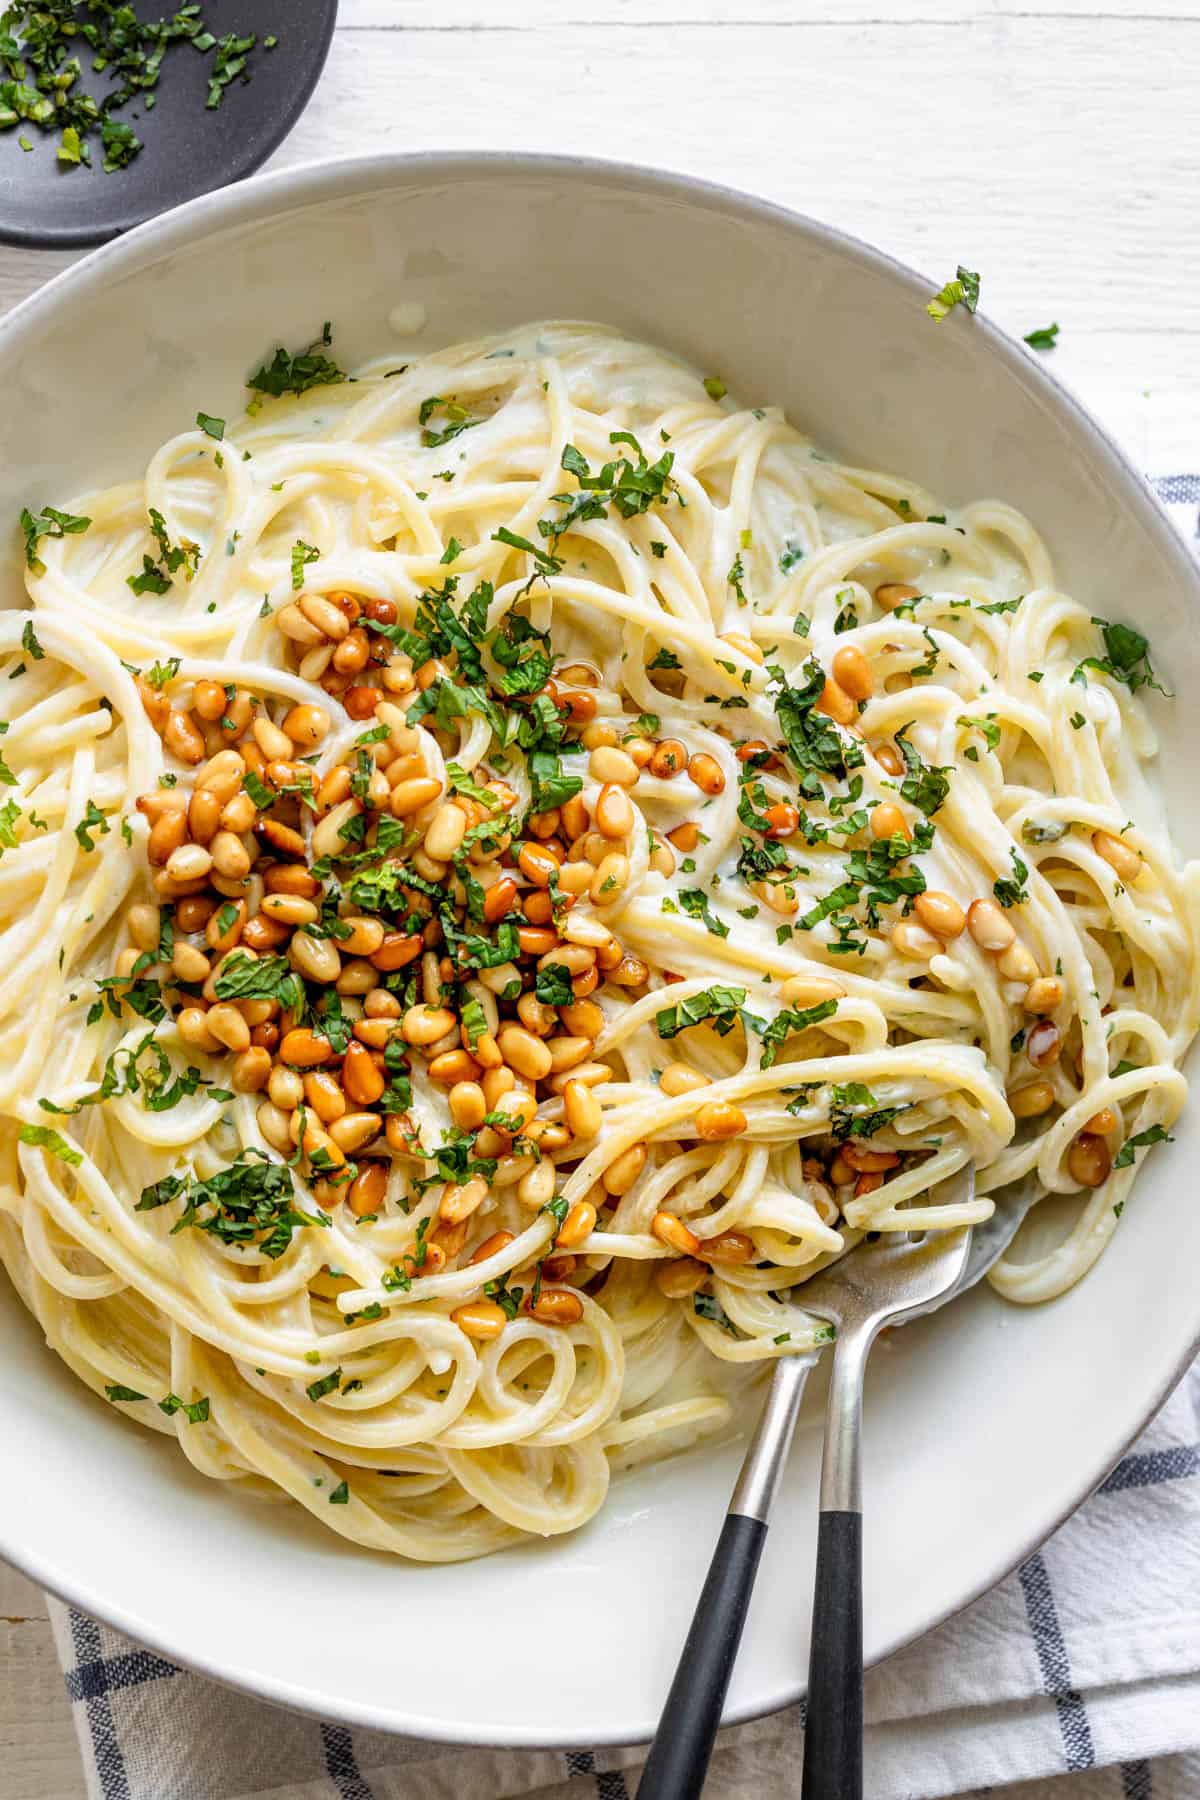 Serving dish of spaghetti noodles in white sauce with herbs and pine nuts on top and serving spoon and fork tucked in noodles.